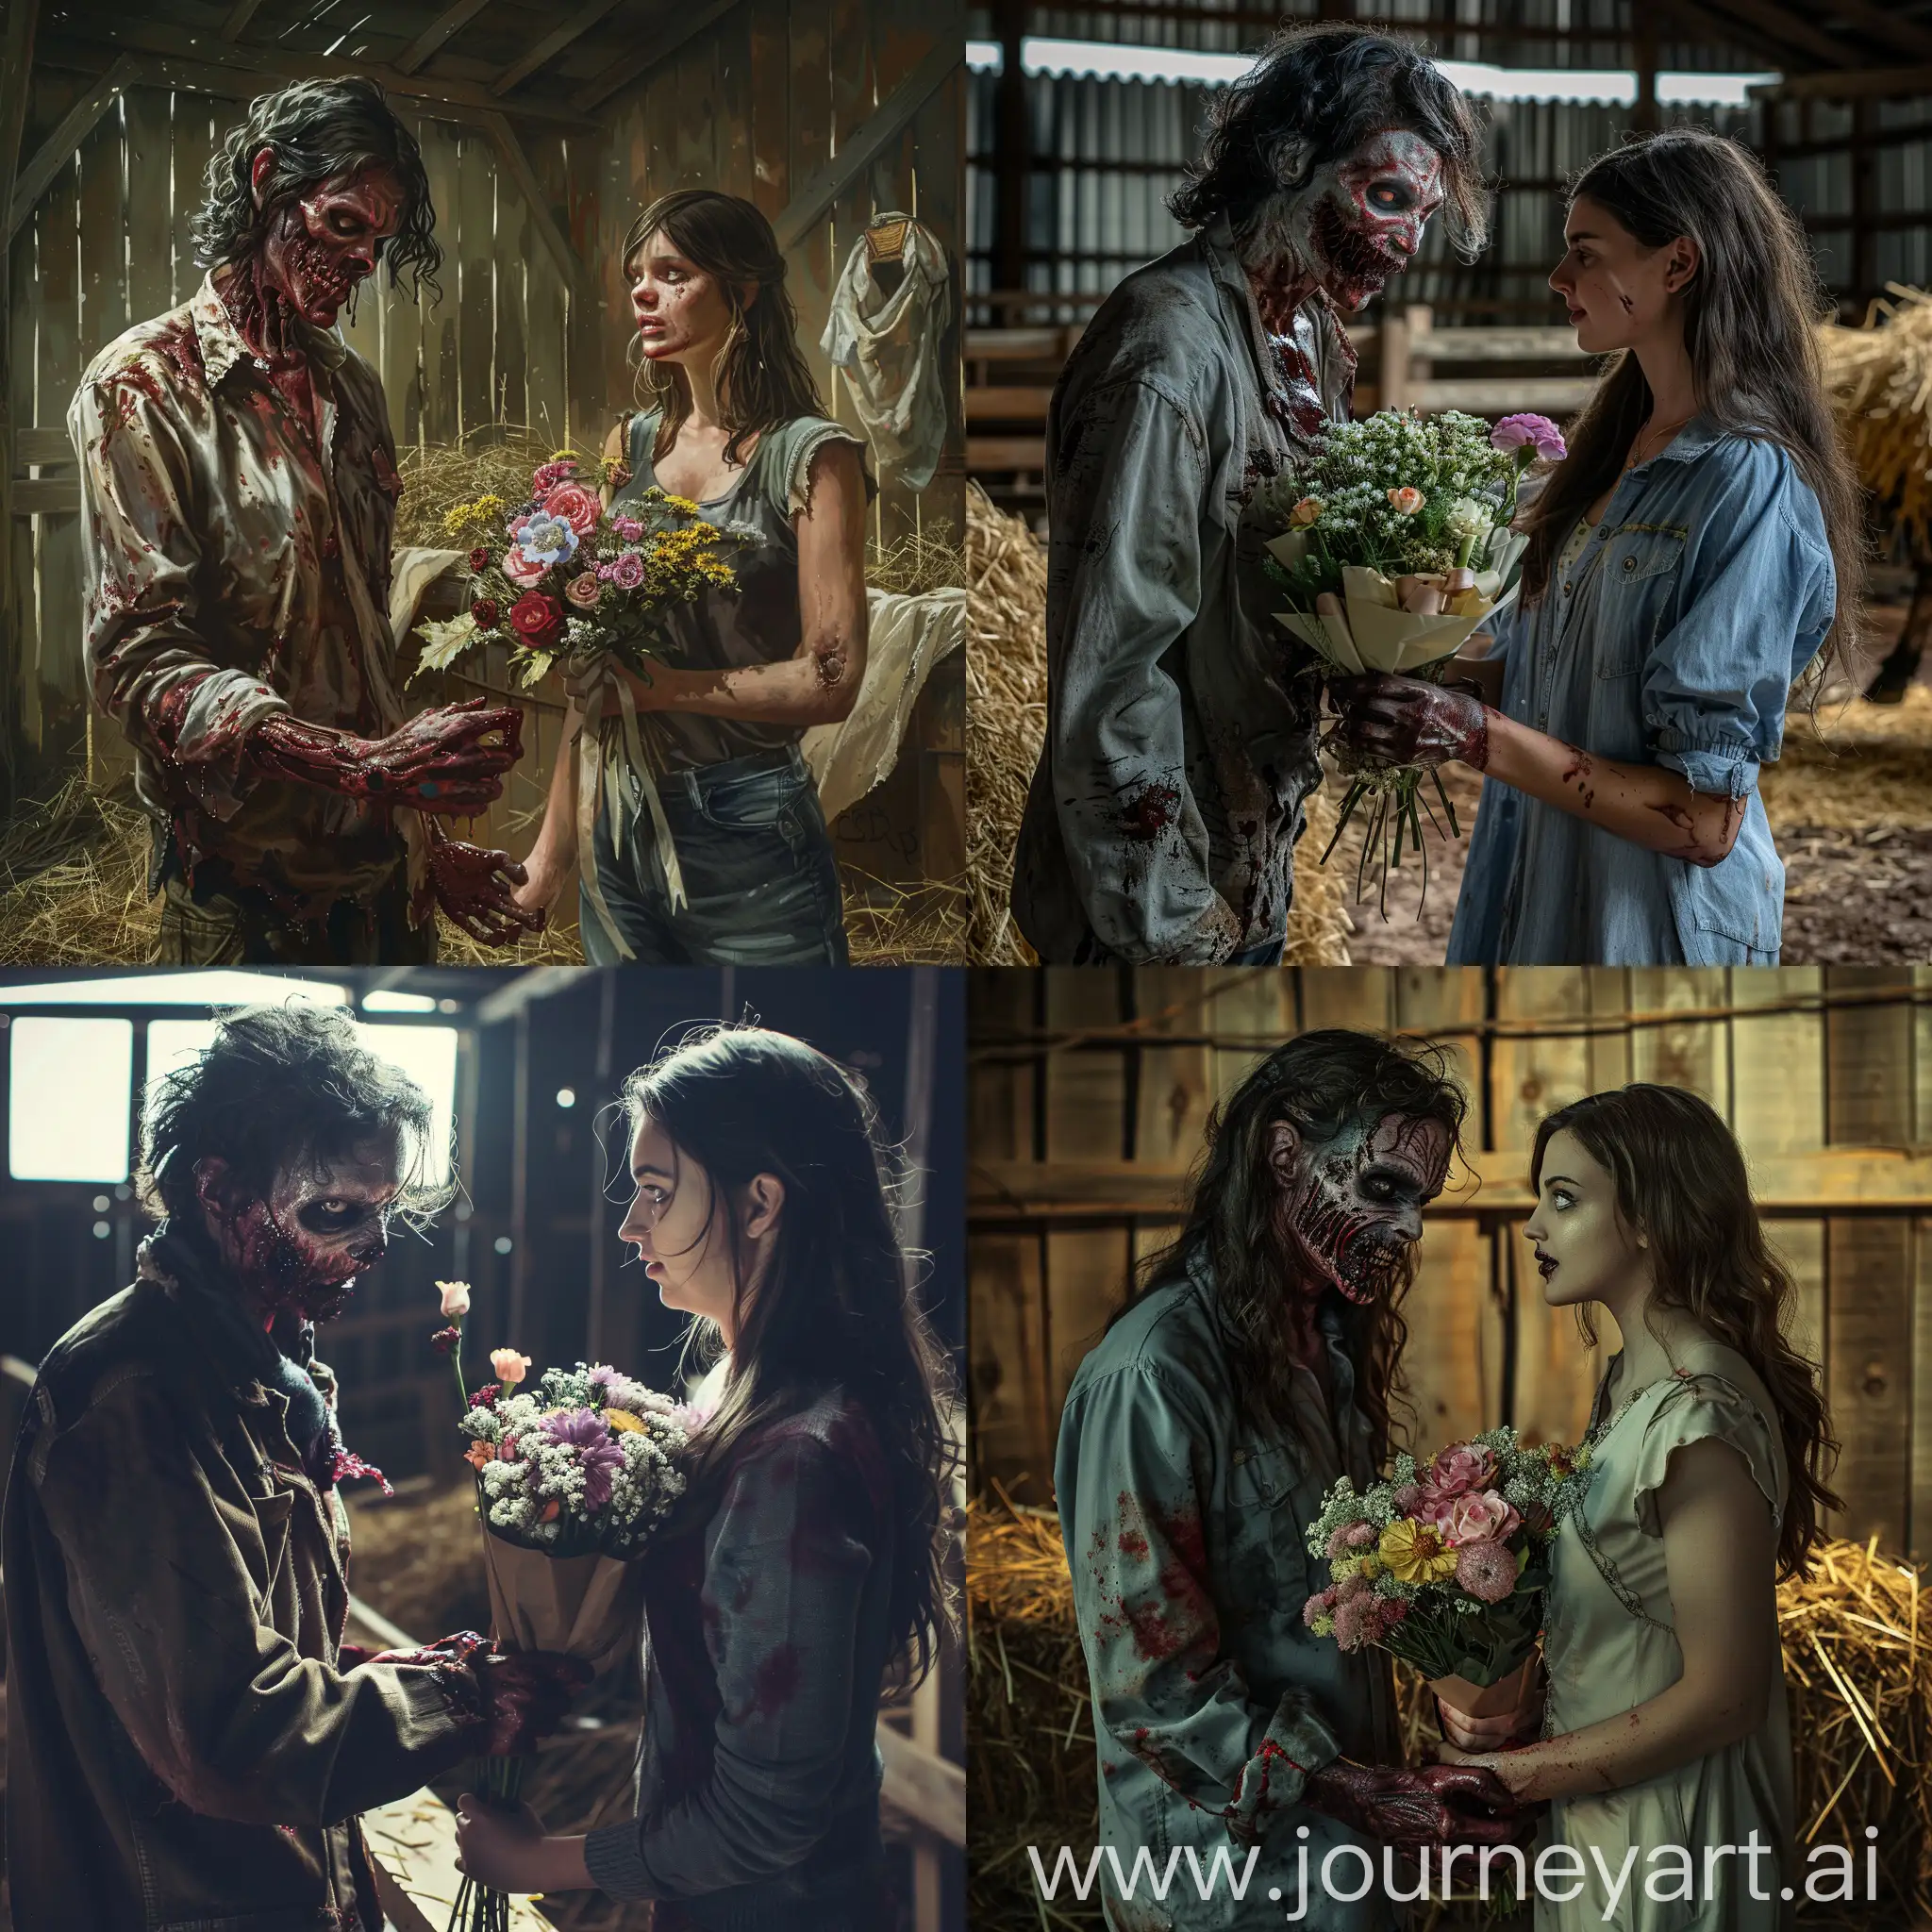 A zombie with a bloody face gives flowers to a brunette. They both stand in a stable